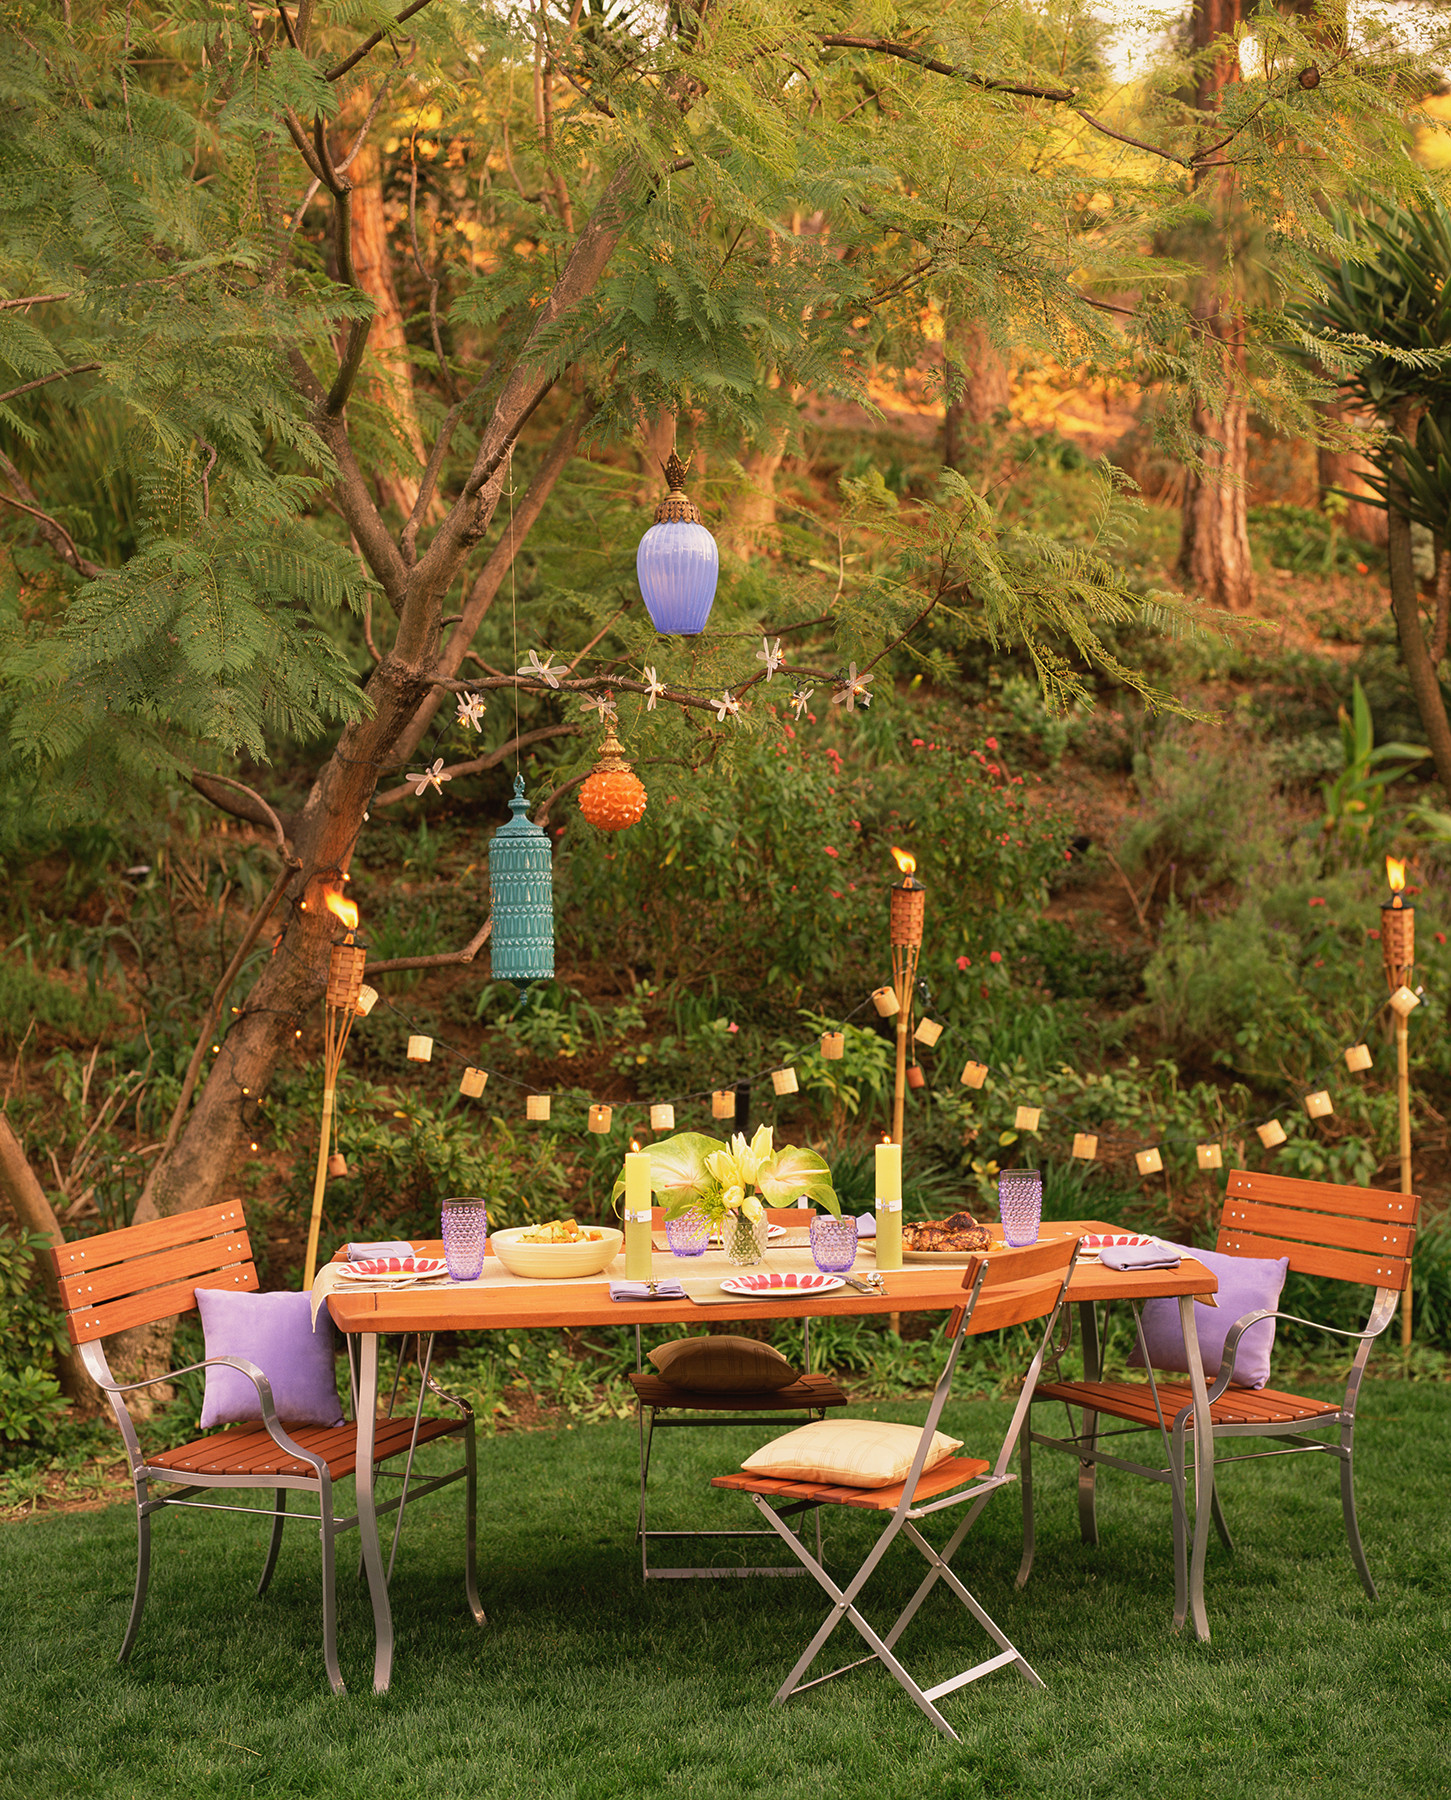 Backyard Party Ideas For Adults
 17 Outdoor Party Ideas for an Effortless Backyard